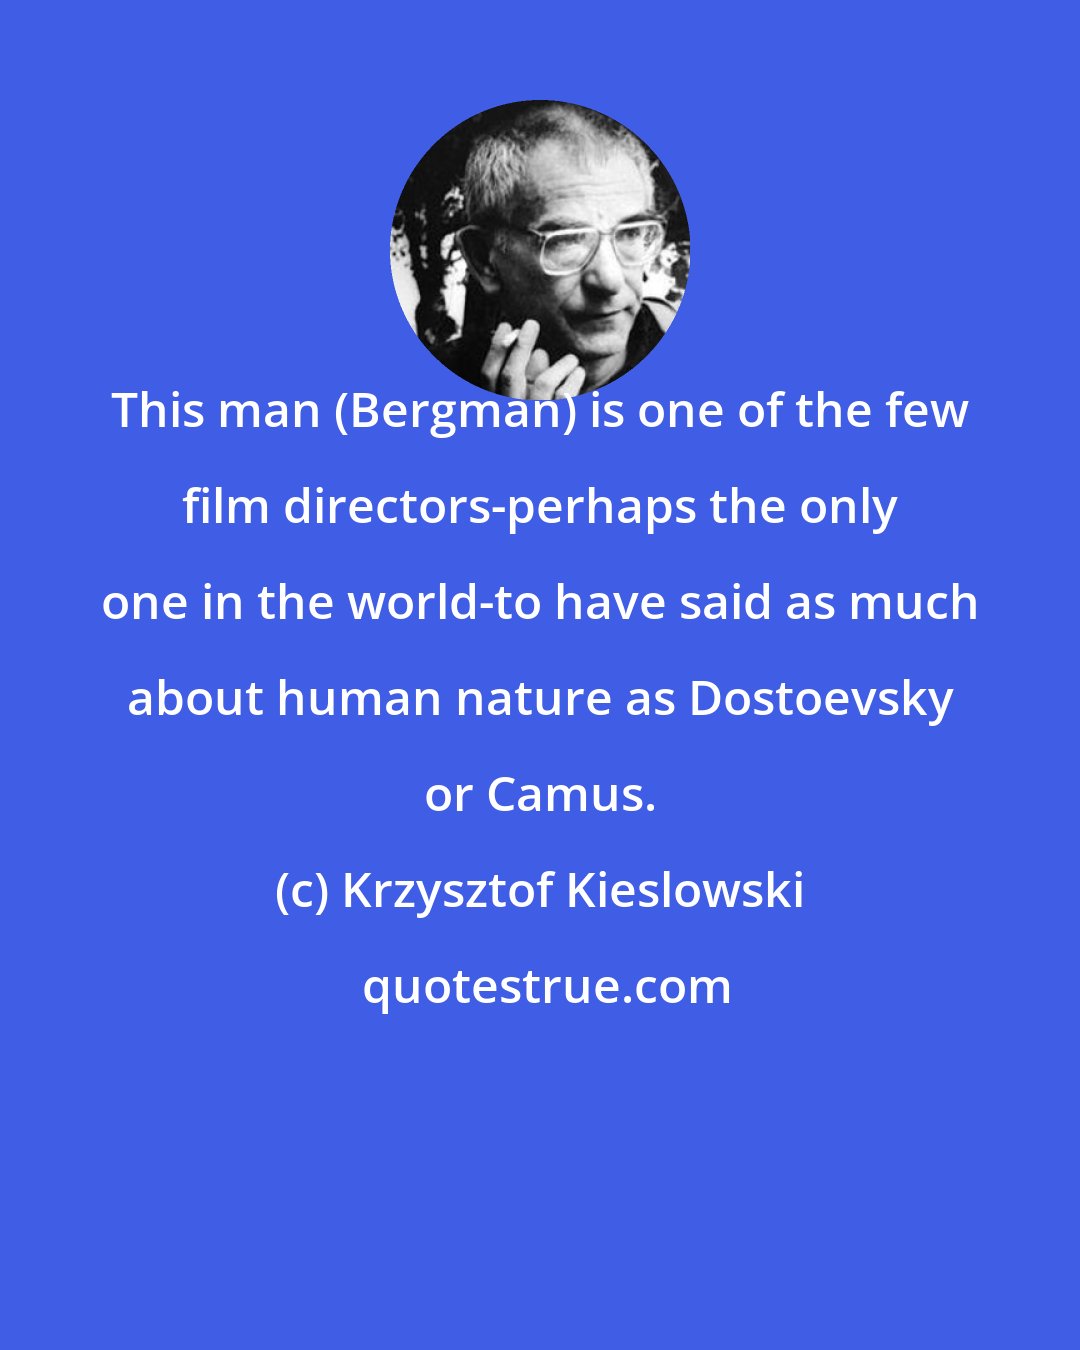 Krzysztof Kieslowski: This man (Bergman) is one of the few film directors-perhaps the only one in the world-to have said as much about human nature as Dostoevsky or Camus.